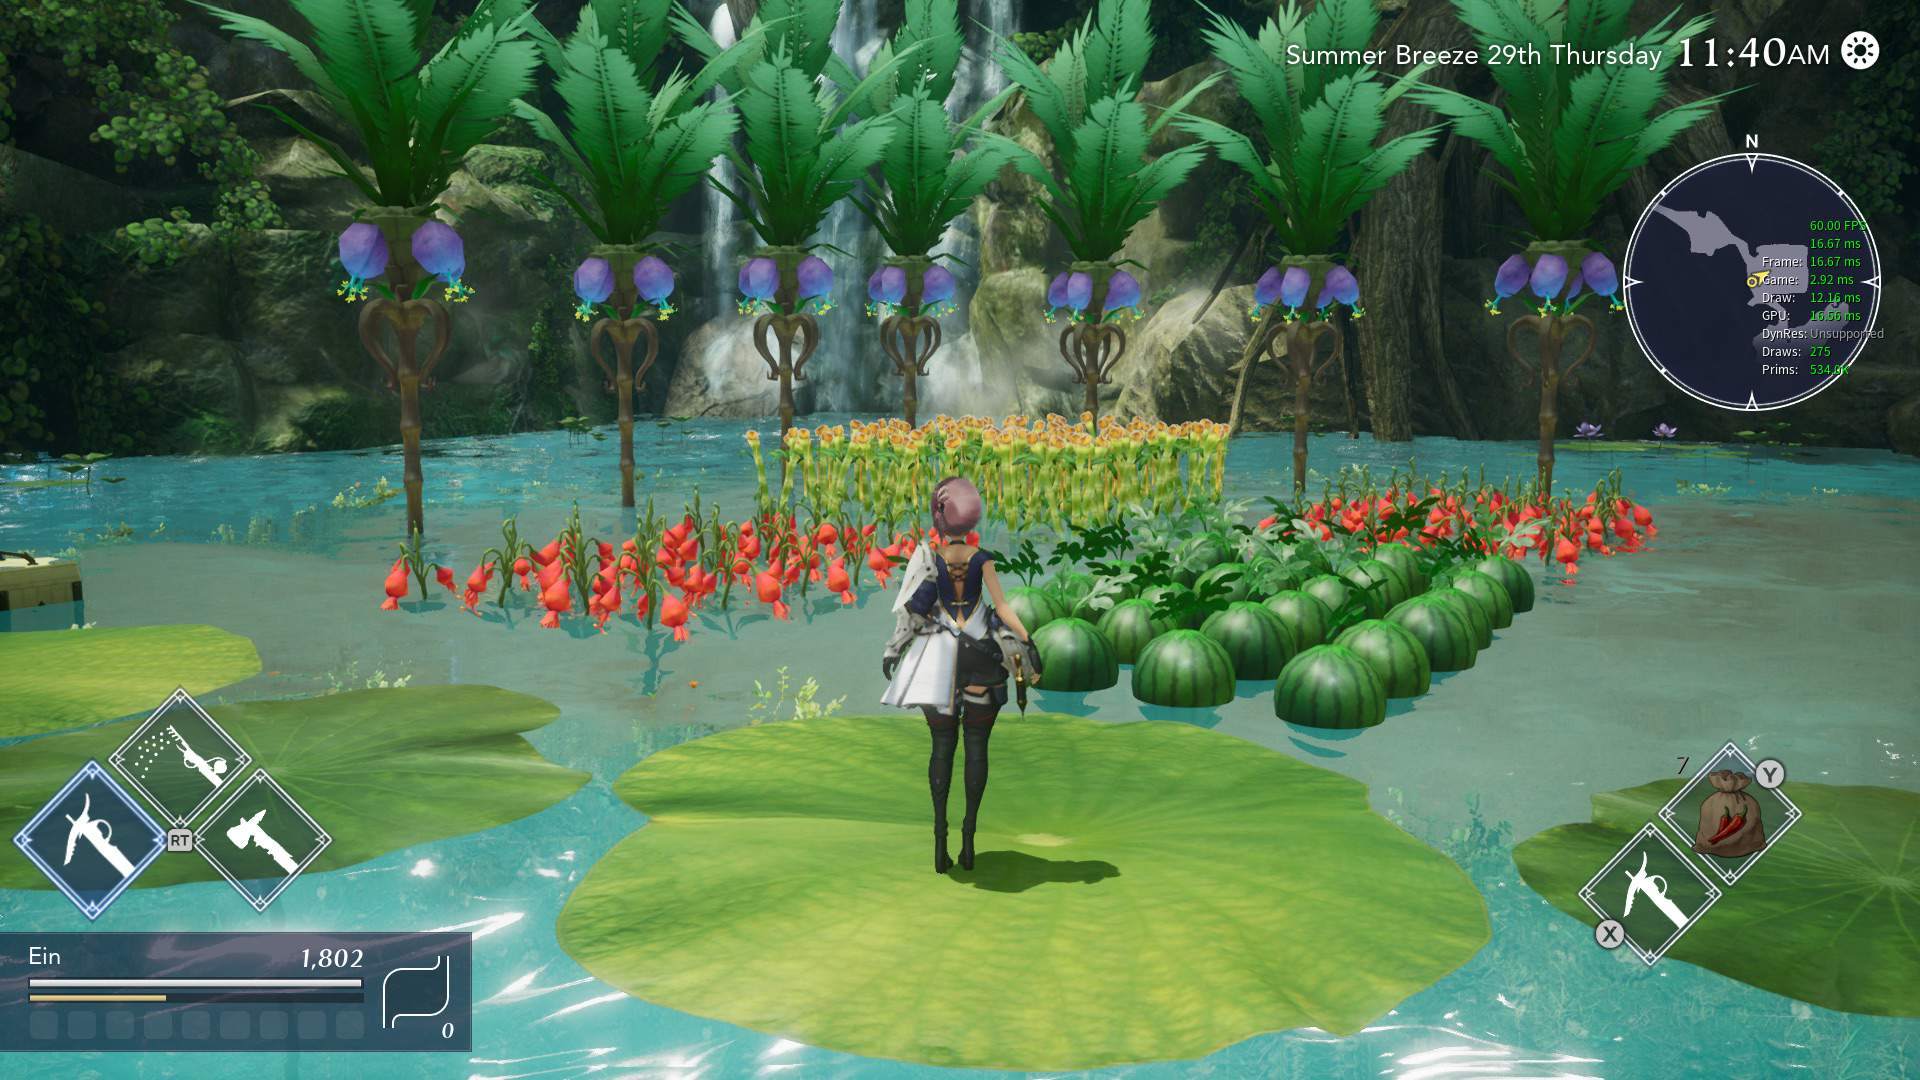 Square Enix Phishers Home In on Dragon Quest X Video Gamers